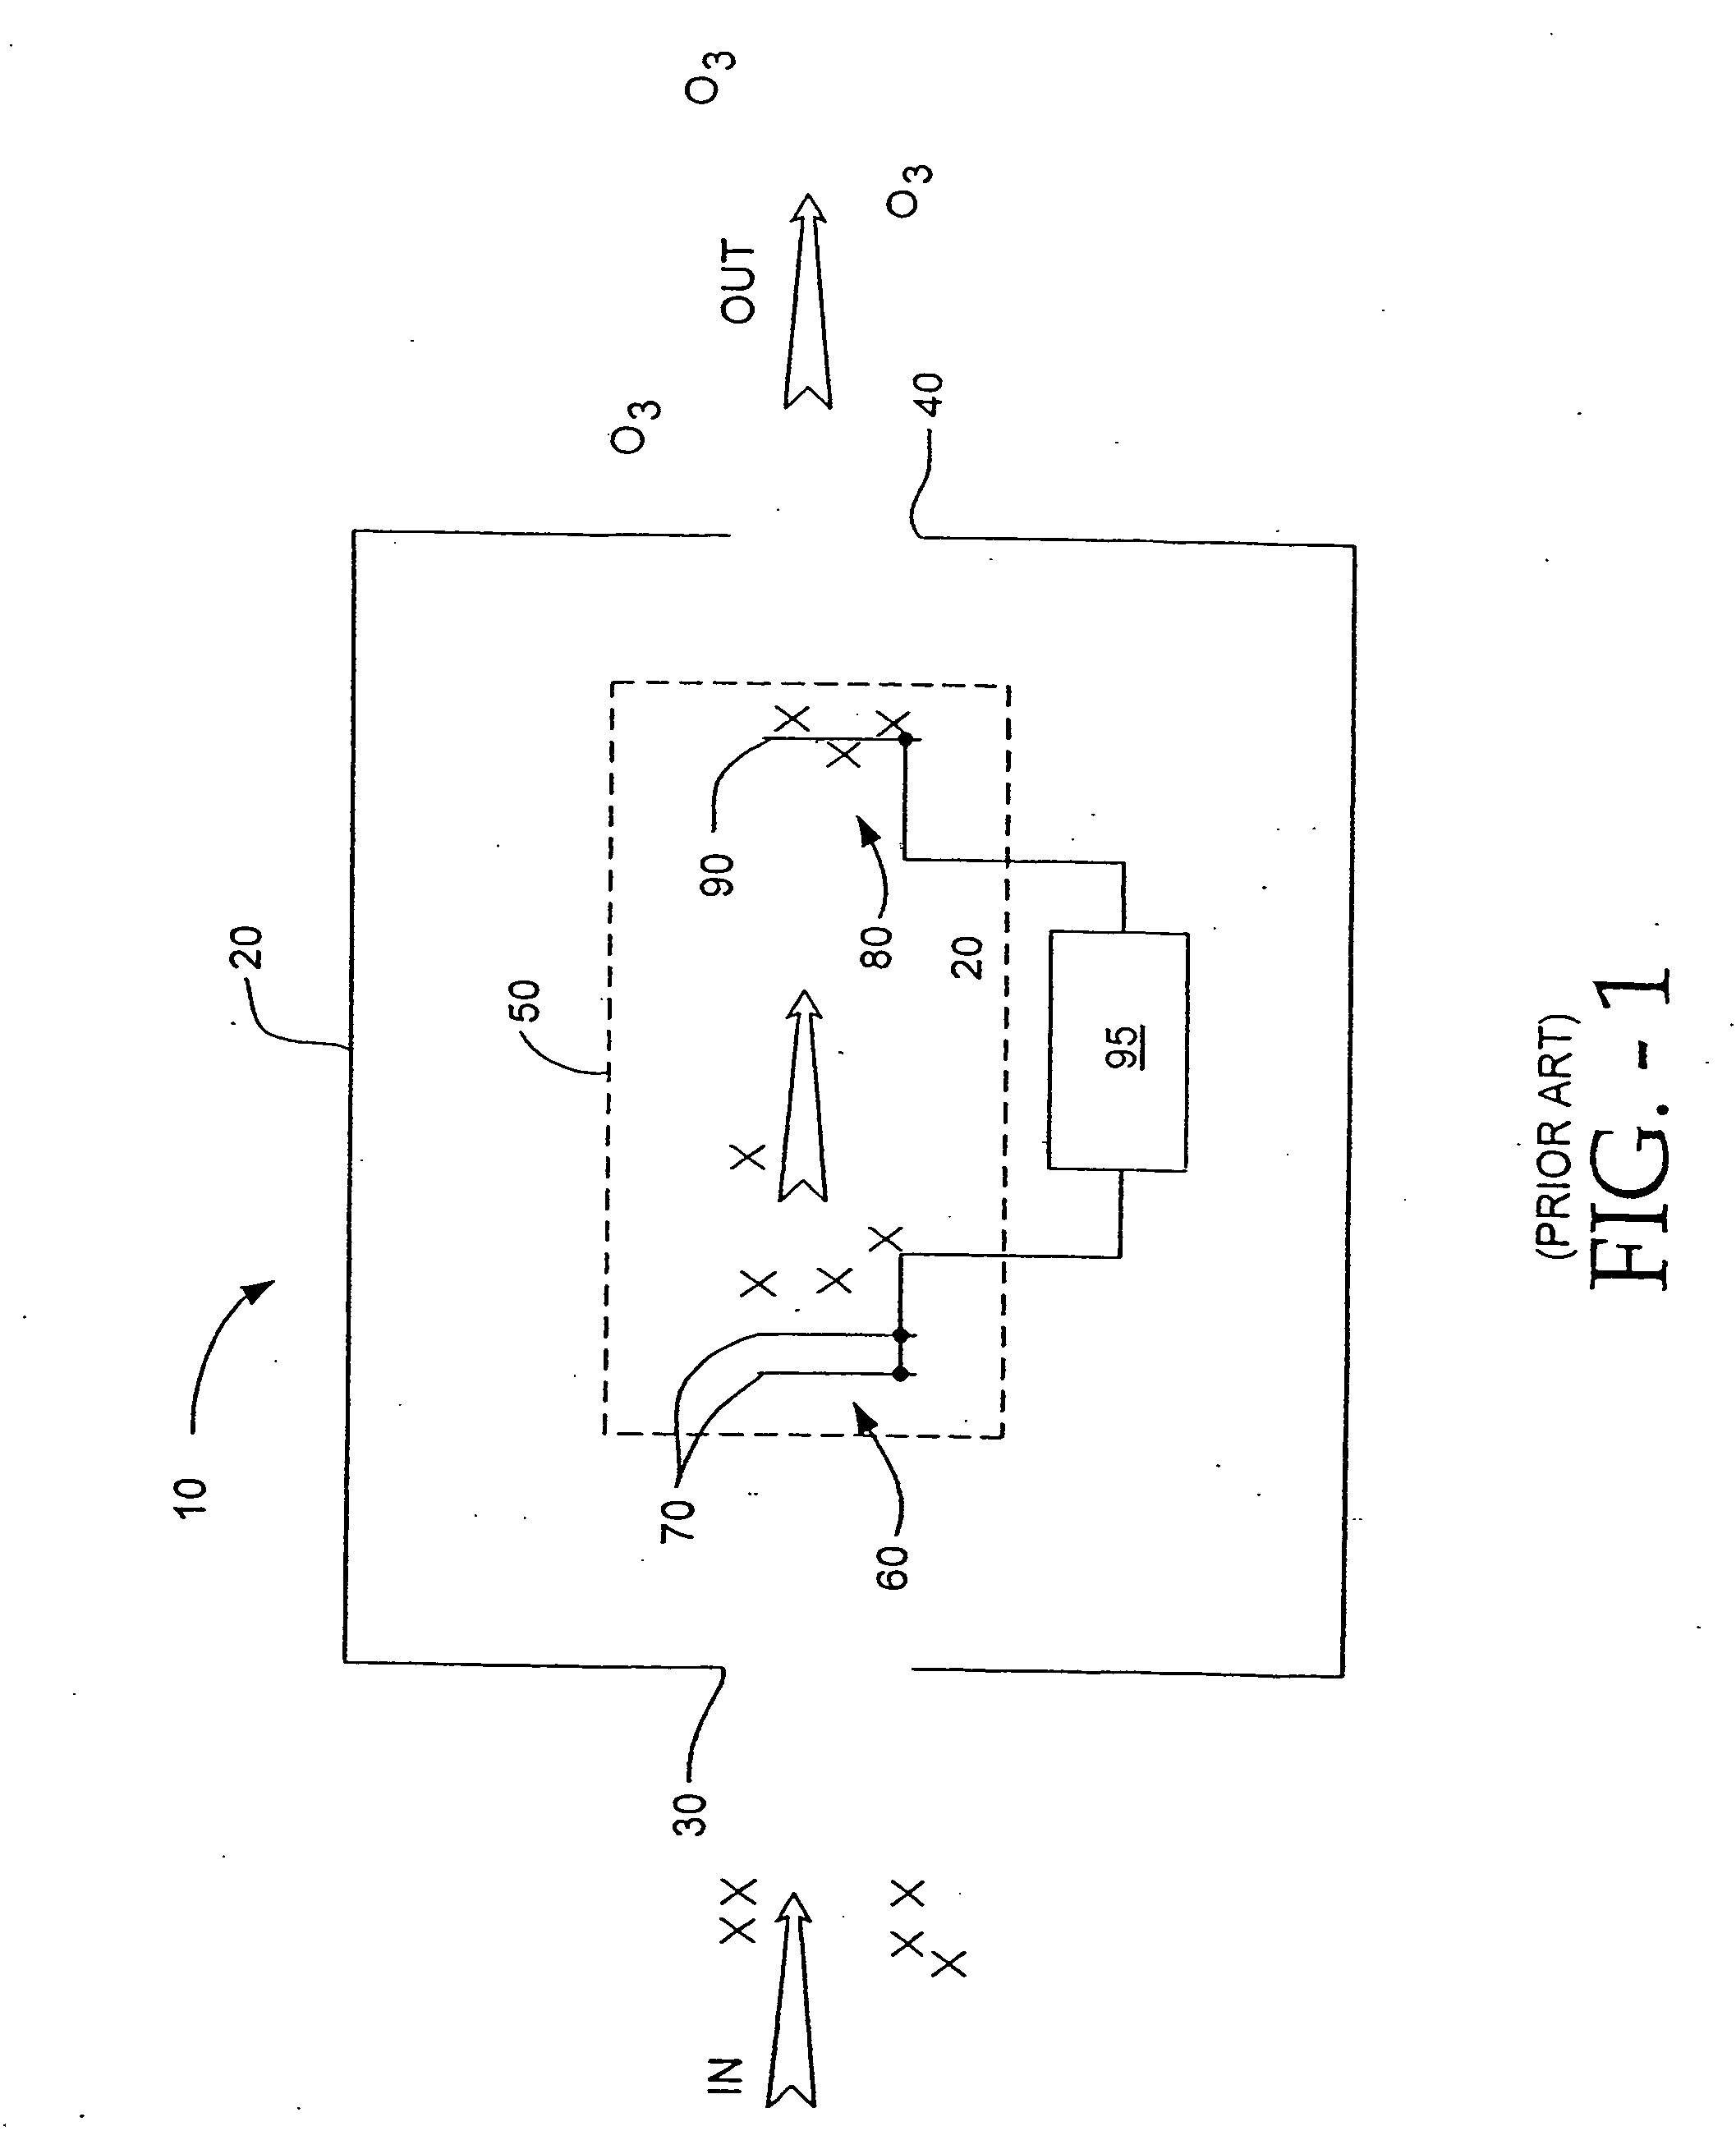 Electro-kinetic air transporter conditioner device with enhanced anti-microorganism capability and variable fan assist